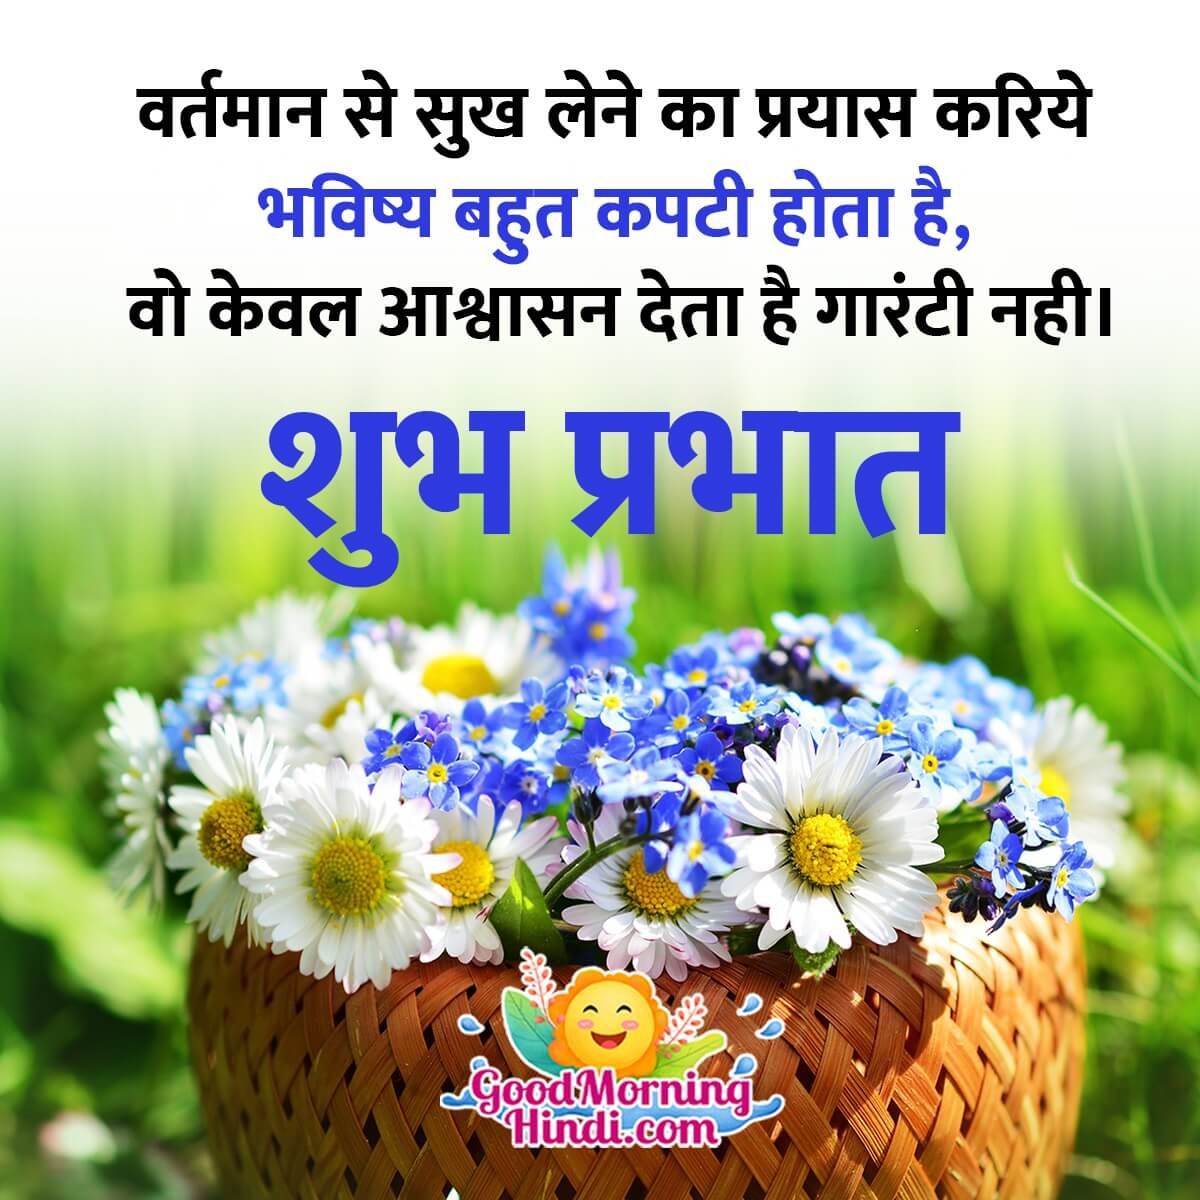 Top 999+ good morning quotes in hindi images – Amazing Collection good morning quotes in hindi images Full 4K